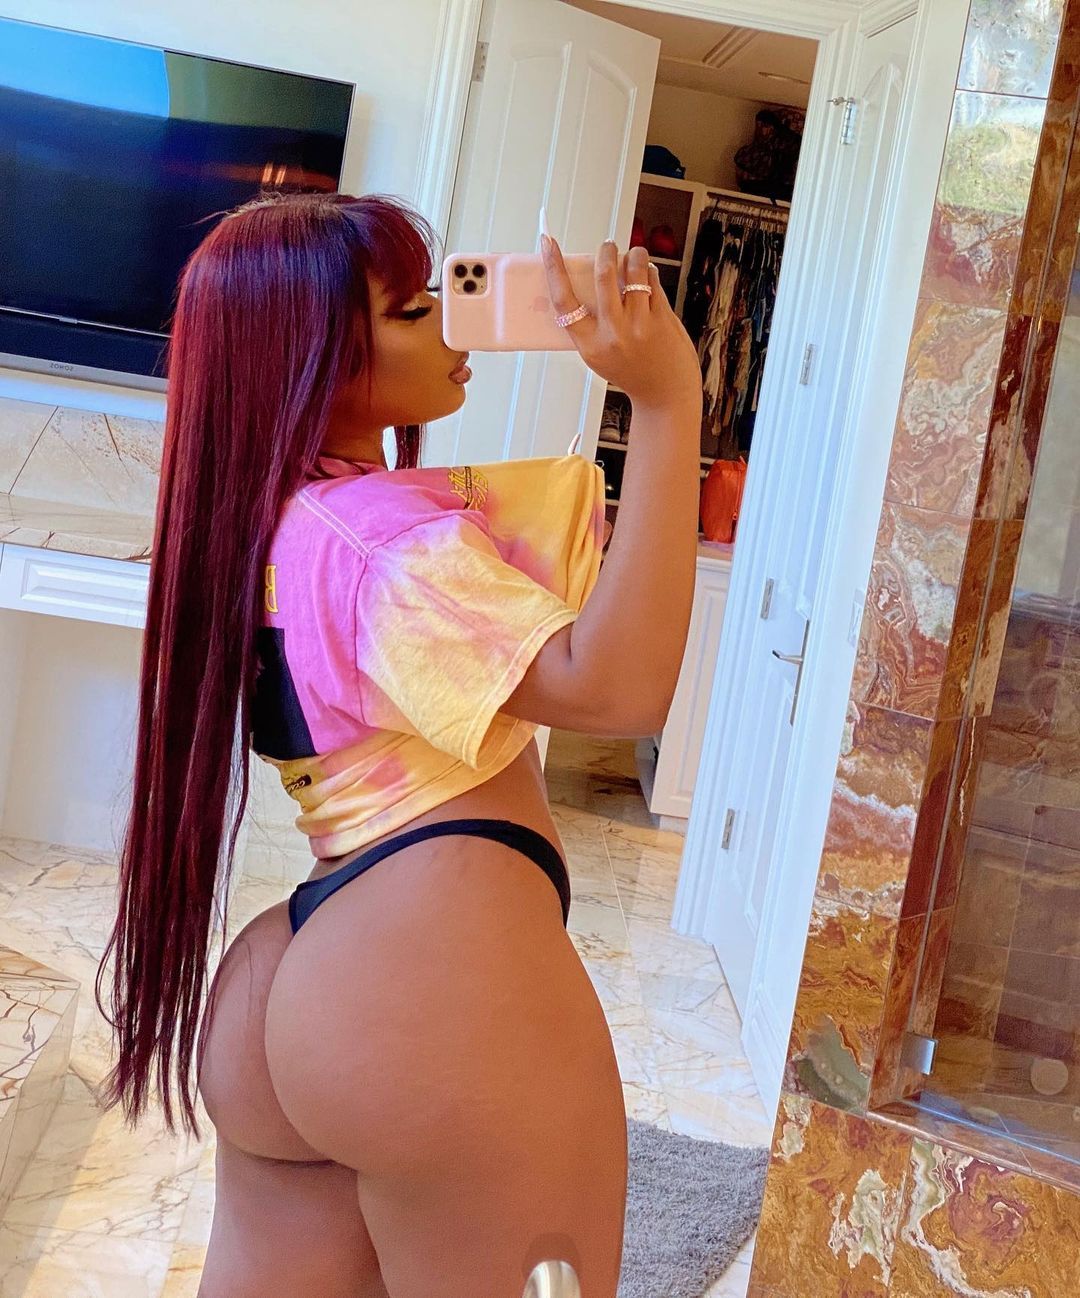 Girls showing their ass Megan Thee Stallion Shows Off Toned Butt In Hottie Bootcamp Instagram